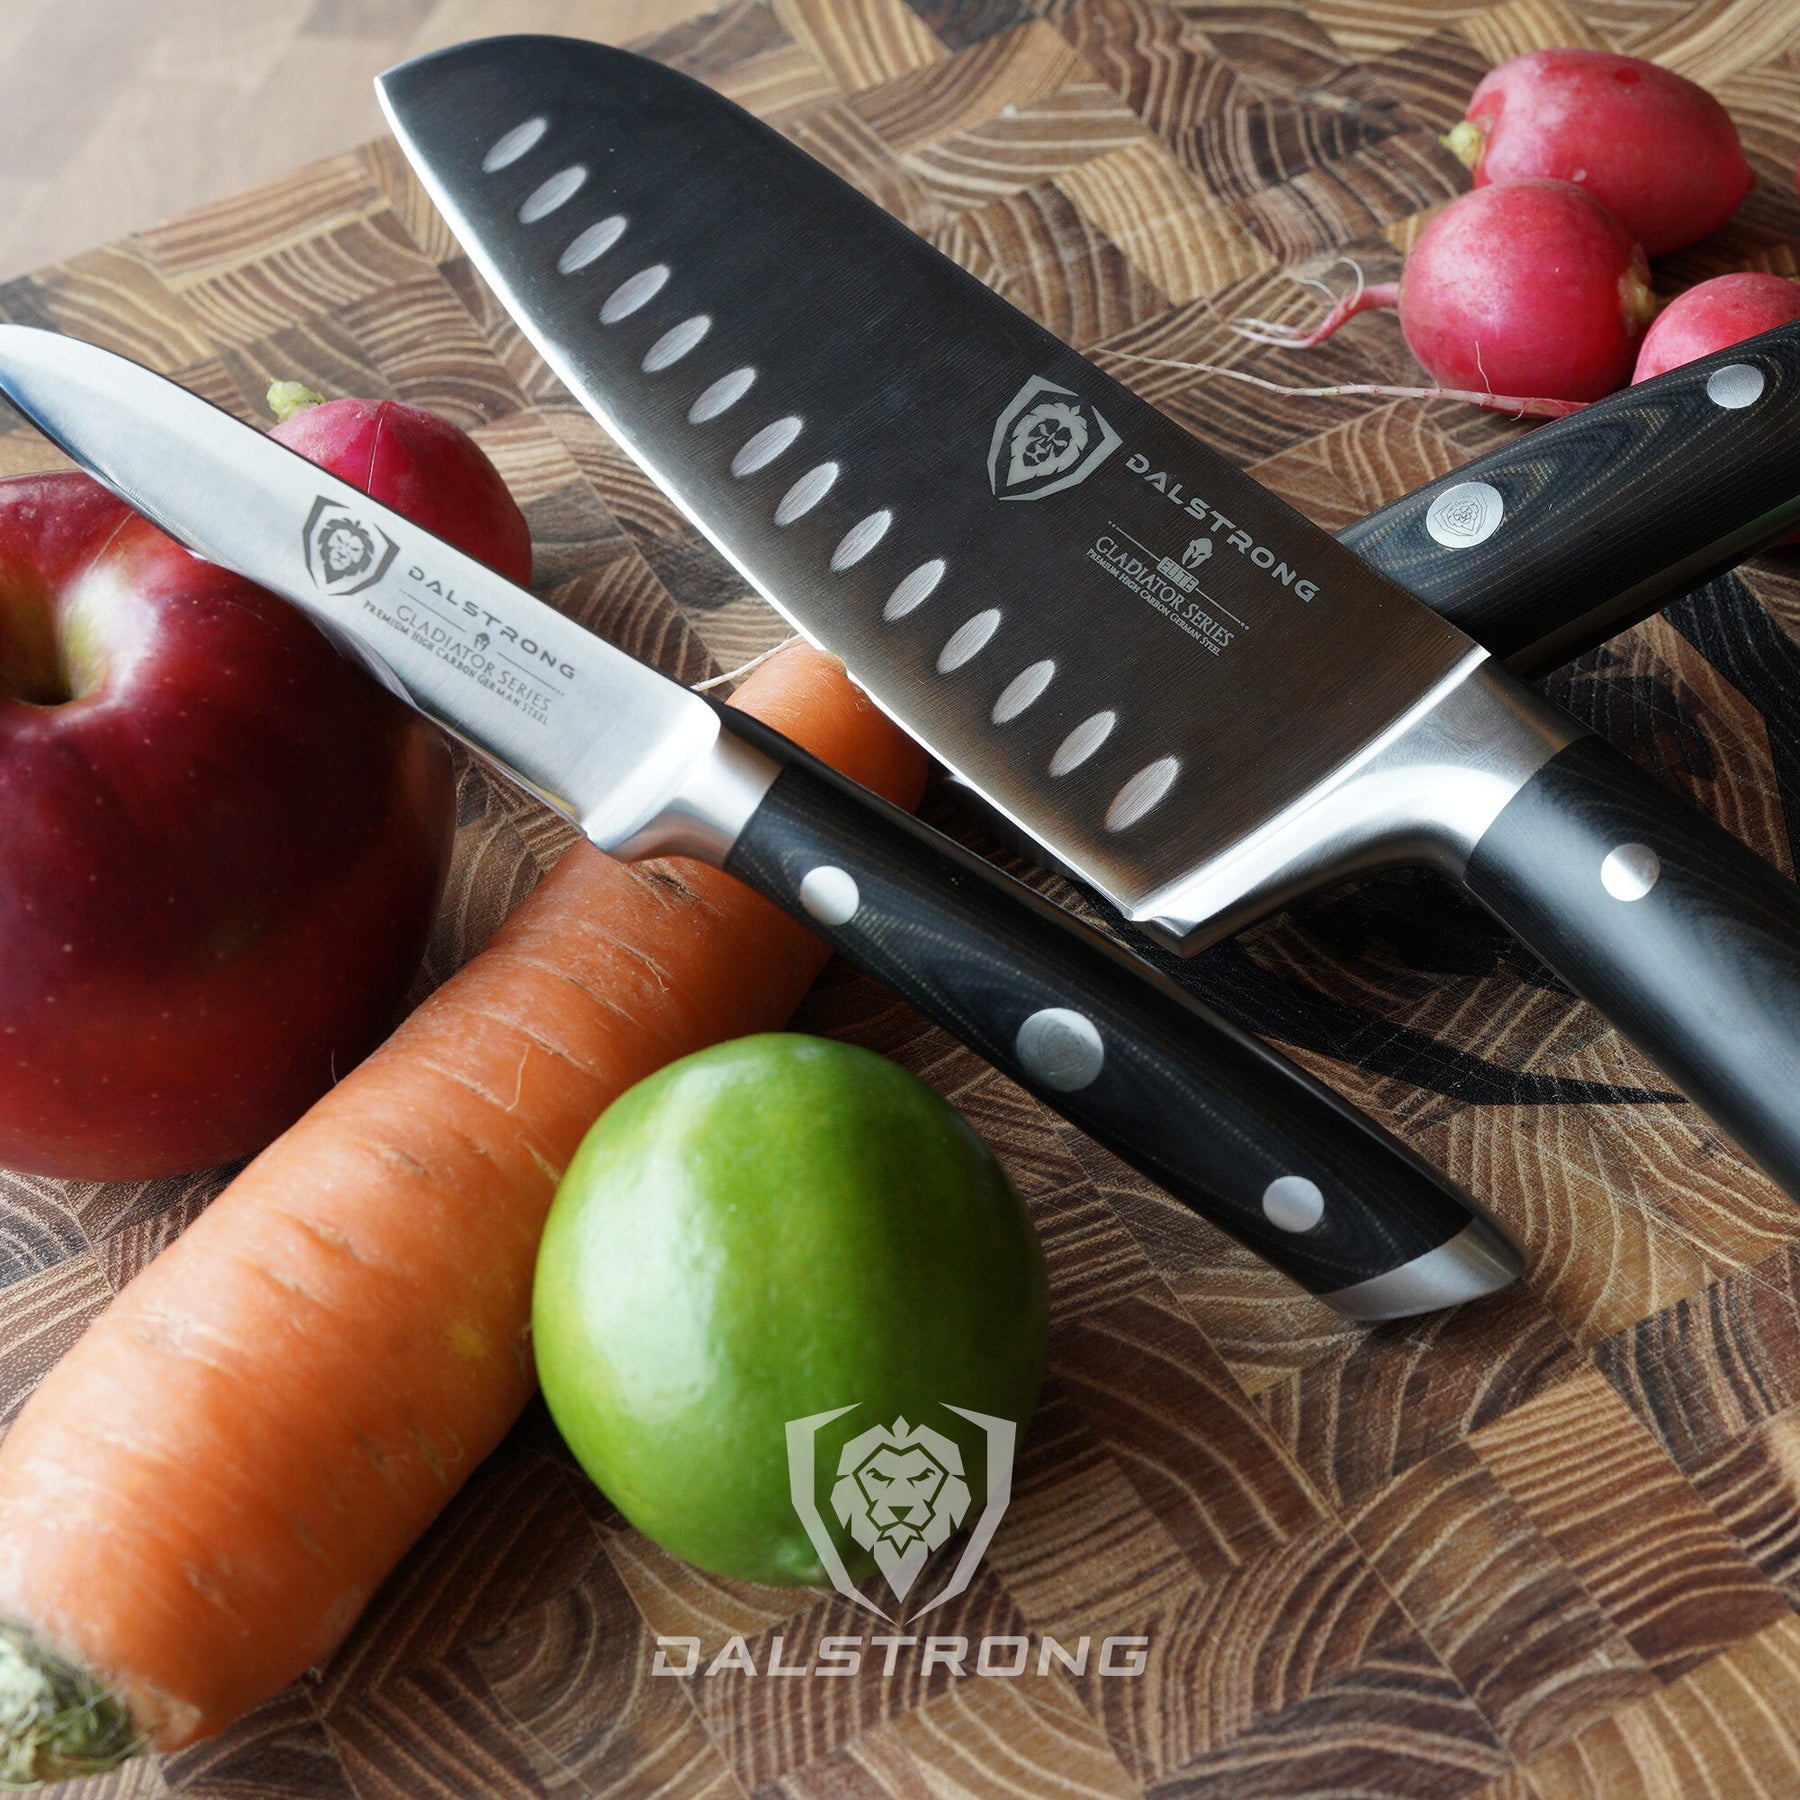 Knife Set Knife Set 3-Piece Knife Set | Chef - Santoku - Paring | Sustainable and Earth-Friendly Material | Gaia Series | Dalstrong - High-Carbon